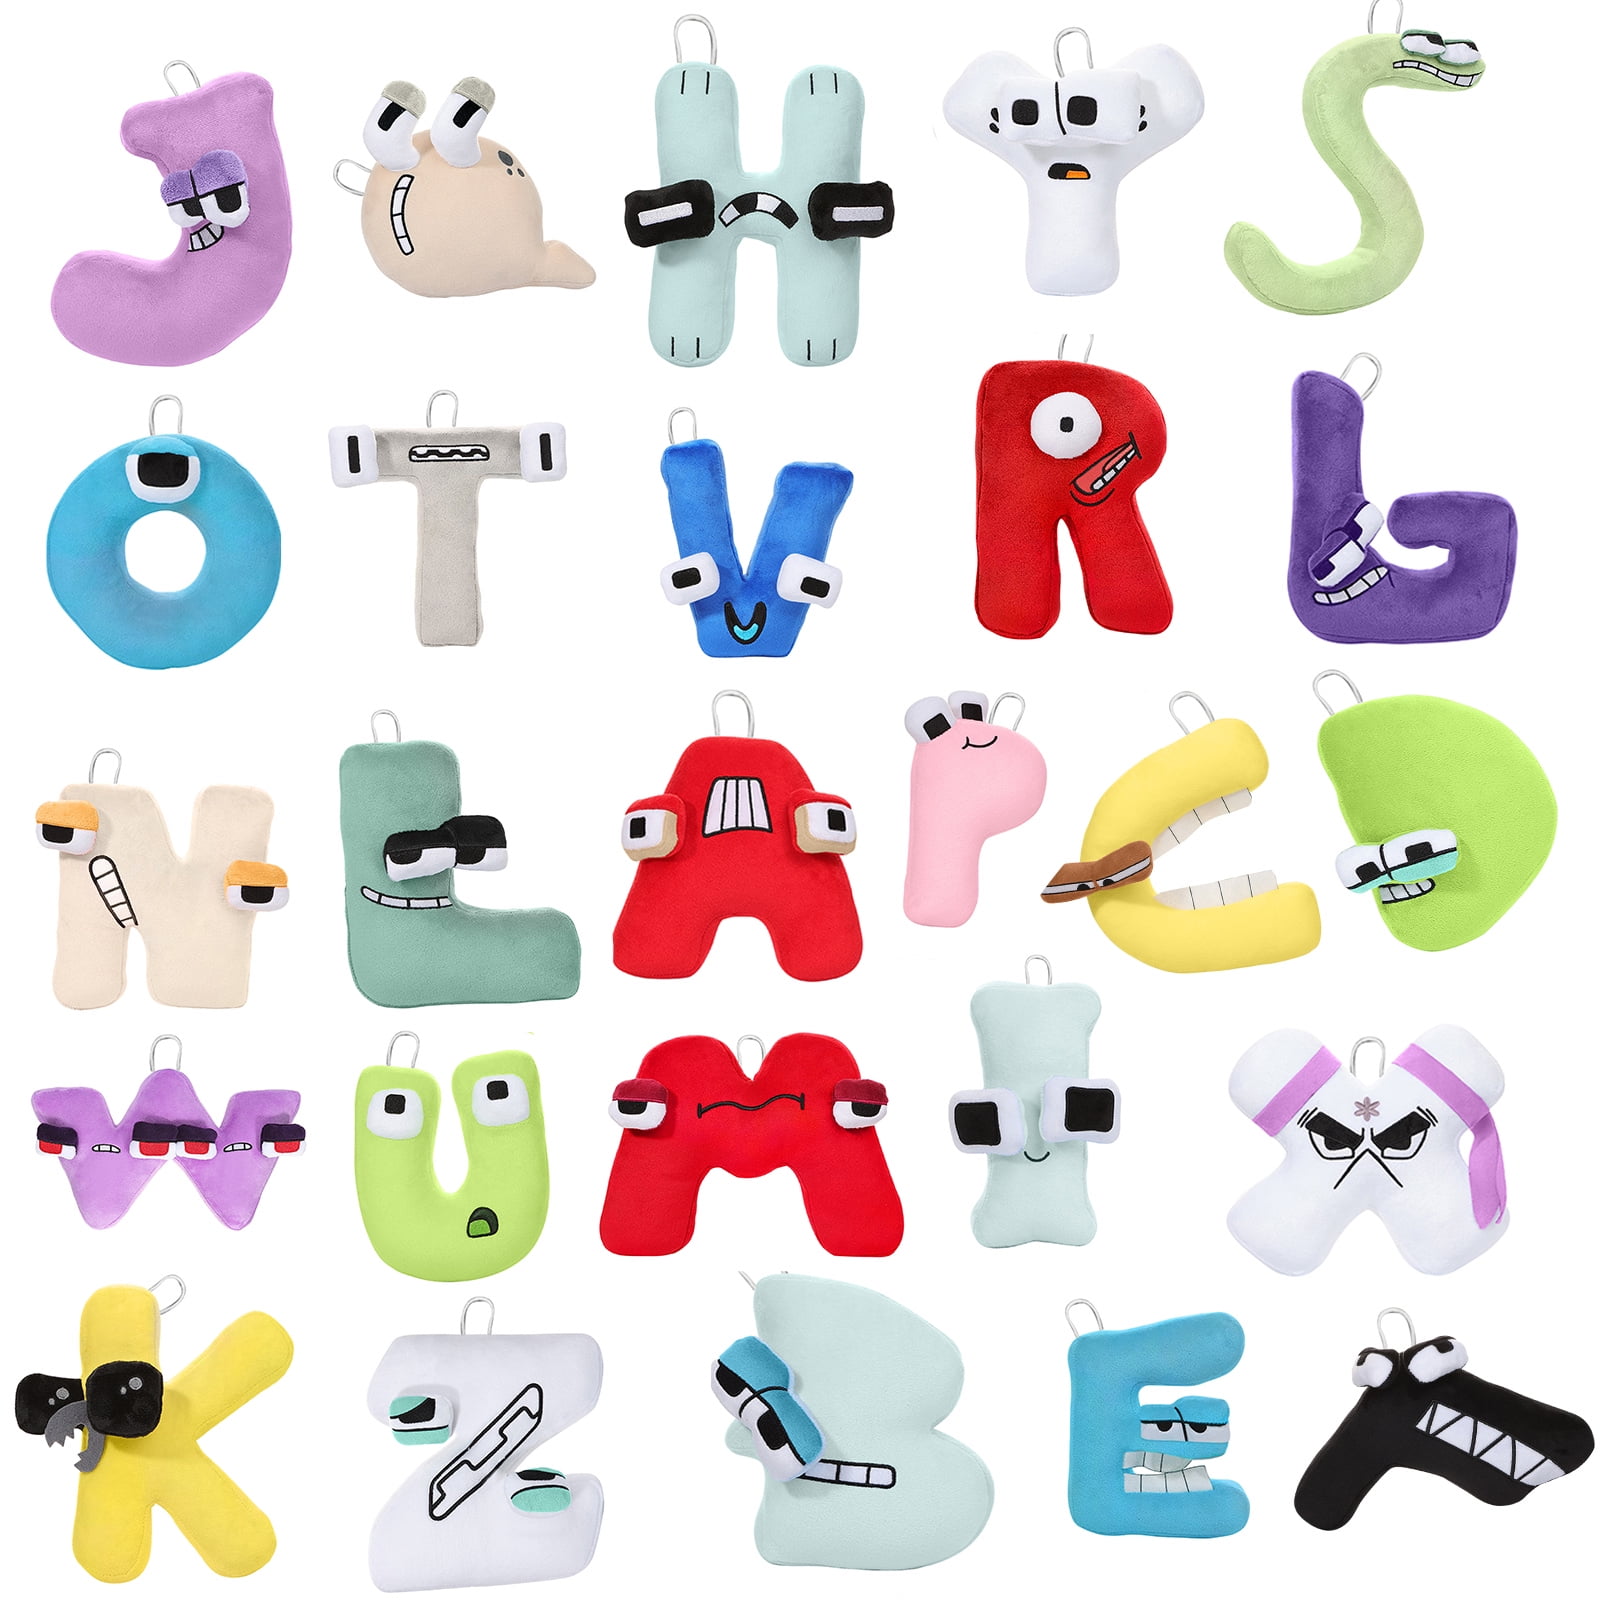 26 Letter Alphabet Plush Toys, Lore Plushies, Soft and Cuddly,Preschool  Stuffed Animals and Toys, Holiday and Birthday Gifts for Kids (Alphabet U)  